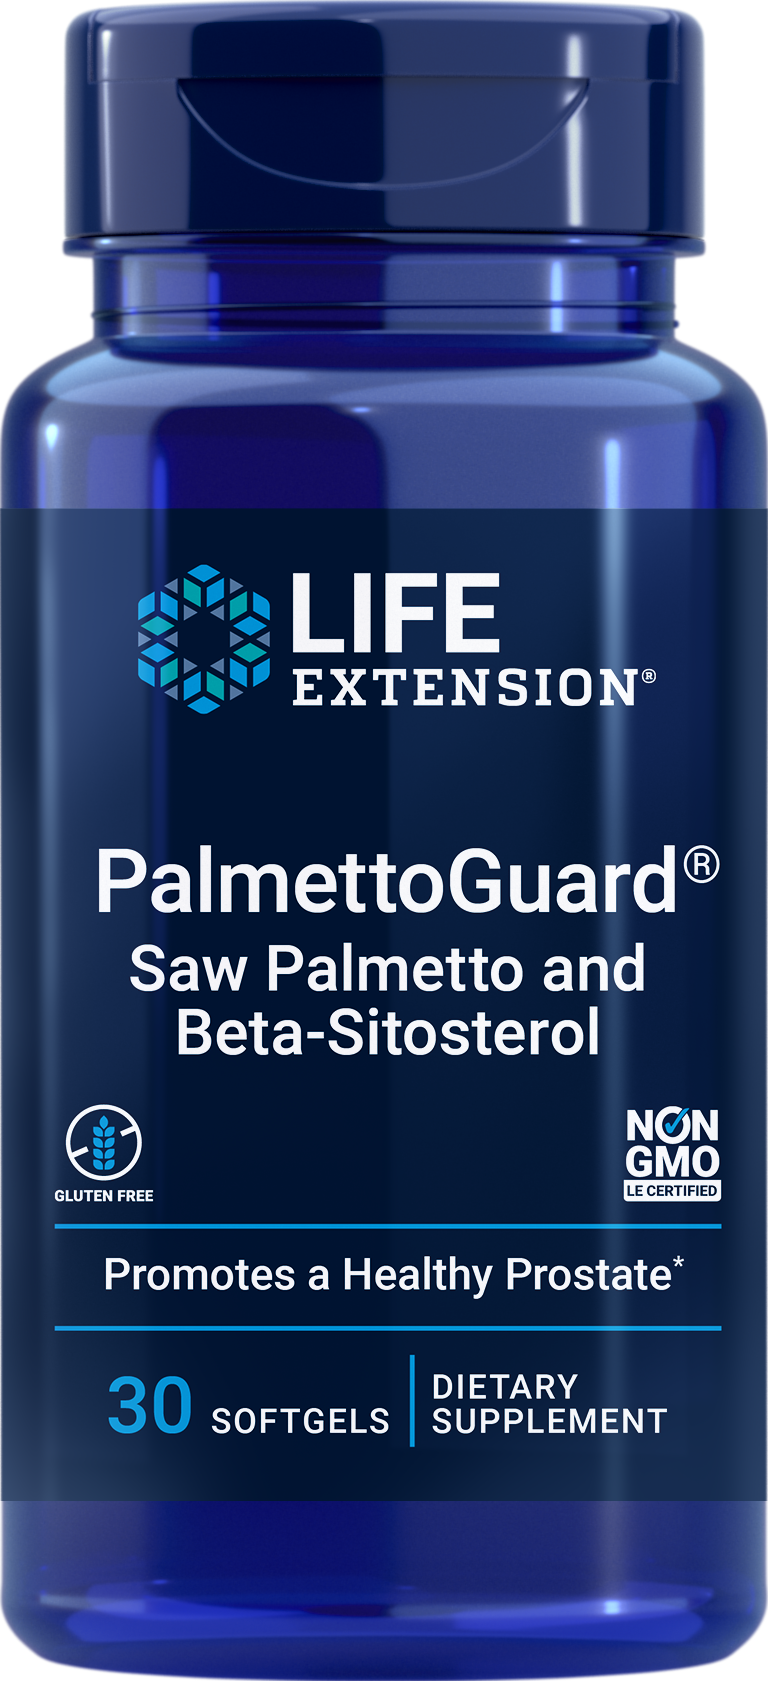 Life Extension PalmettoGuard Saw Palmetto and Beta-Sitosterol 30Softgels